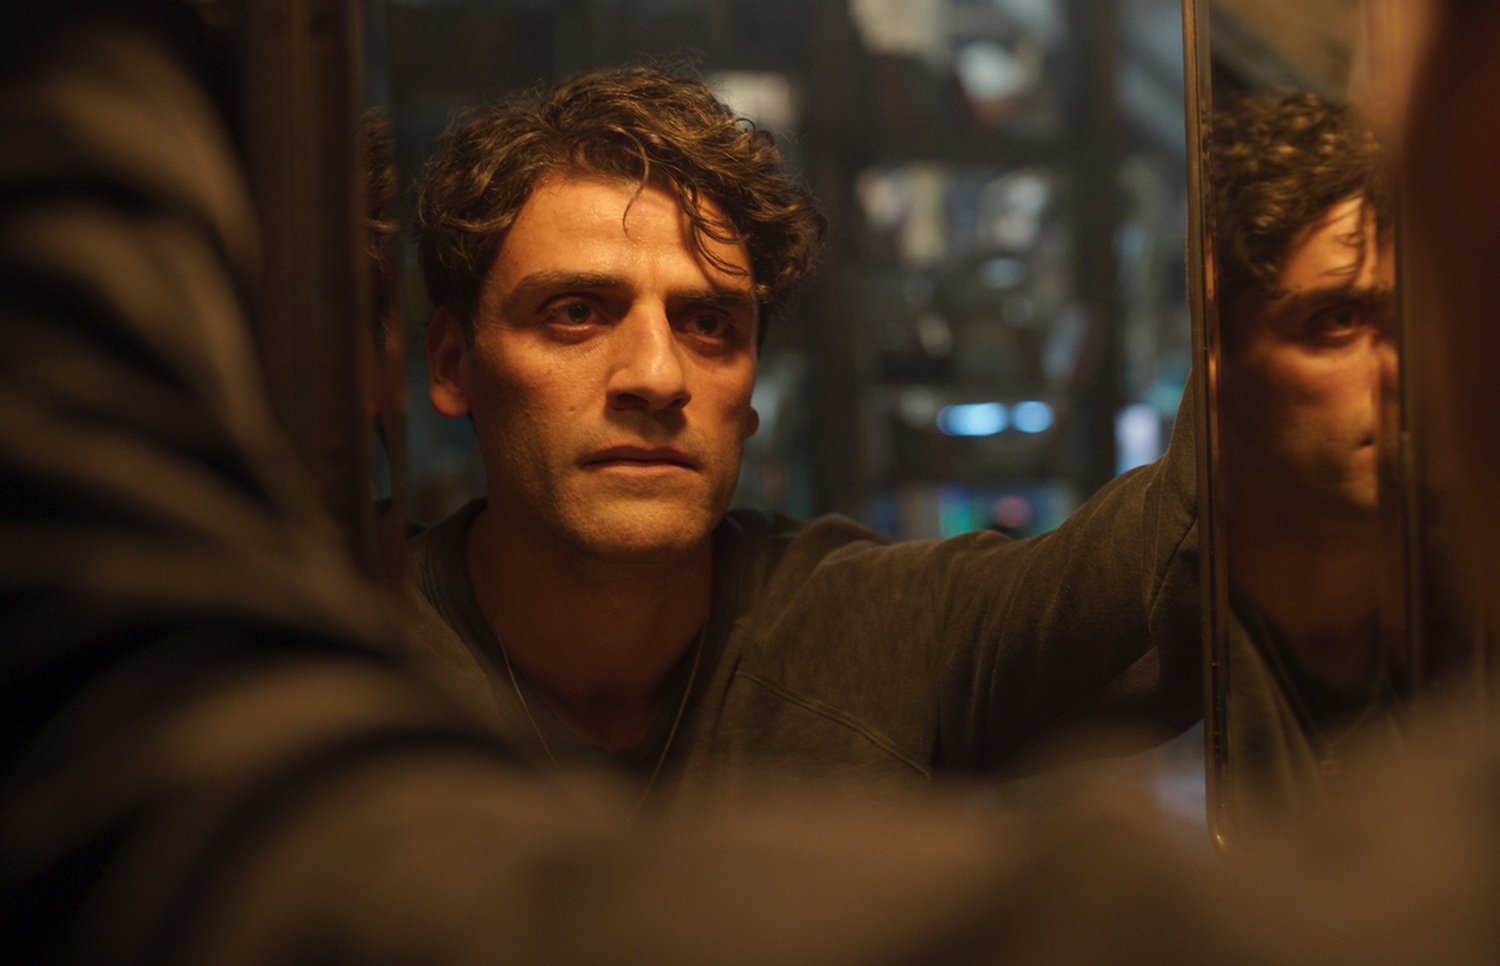 Oscar Isaac as Steven Grant/Marc Spector, looking at himself in a mirror in Moon Knight